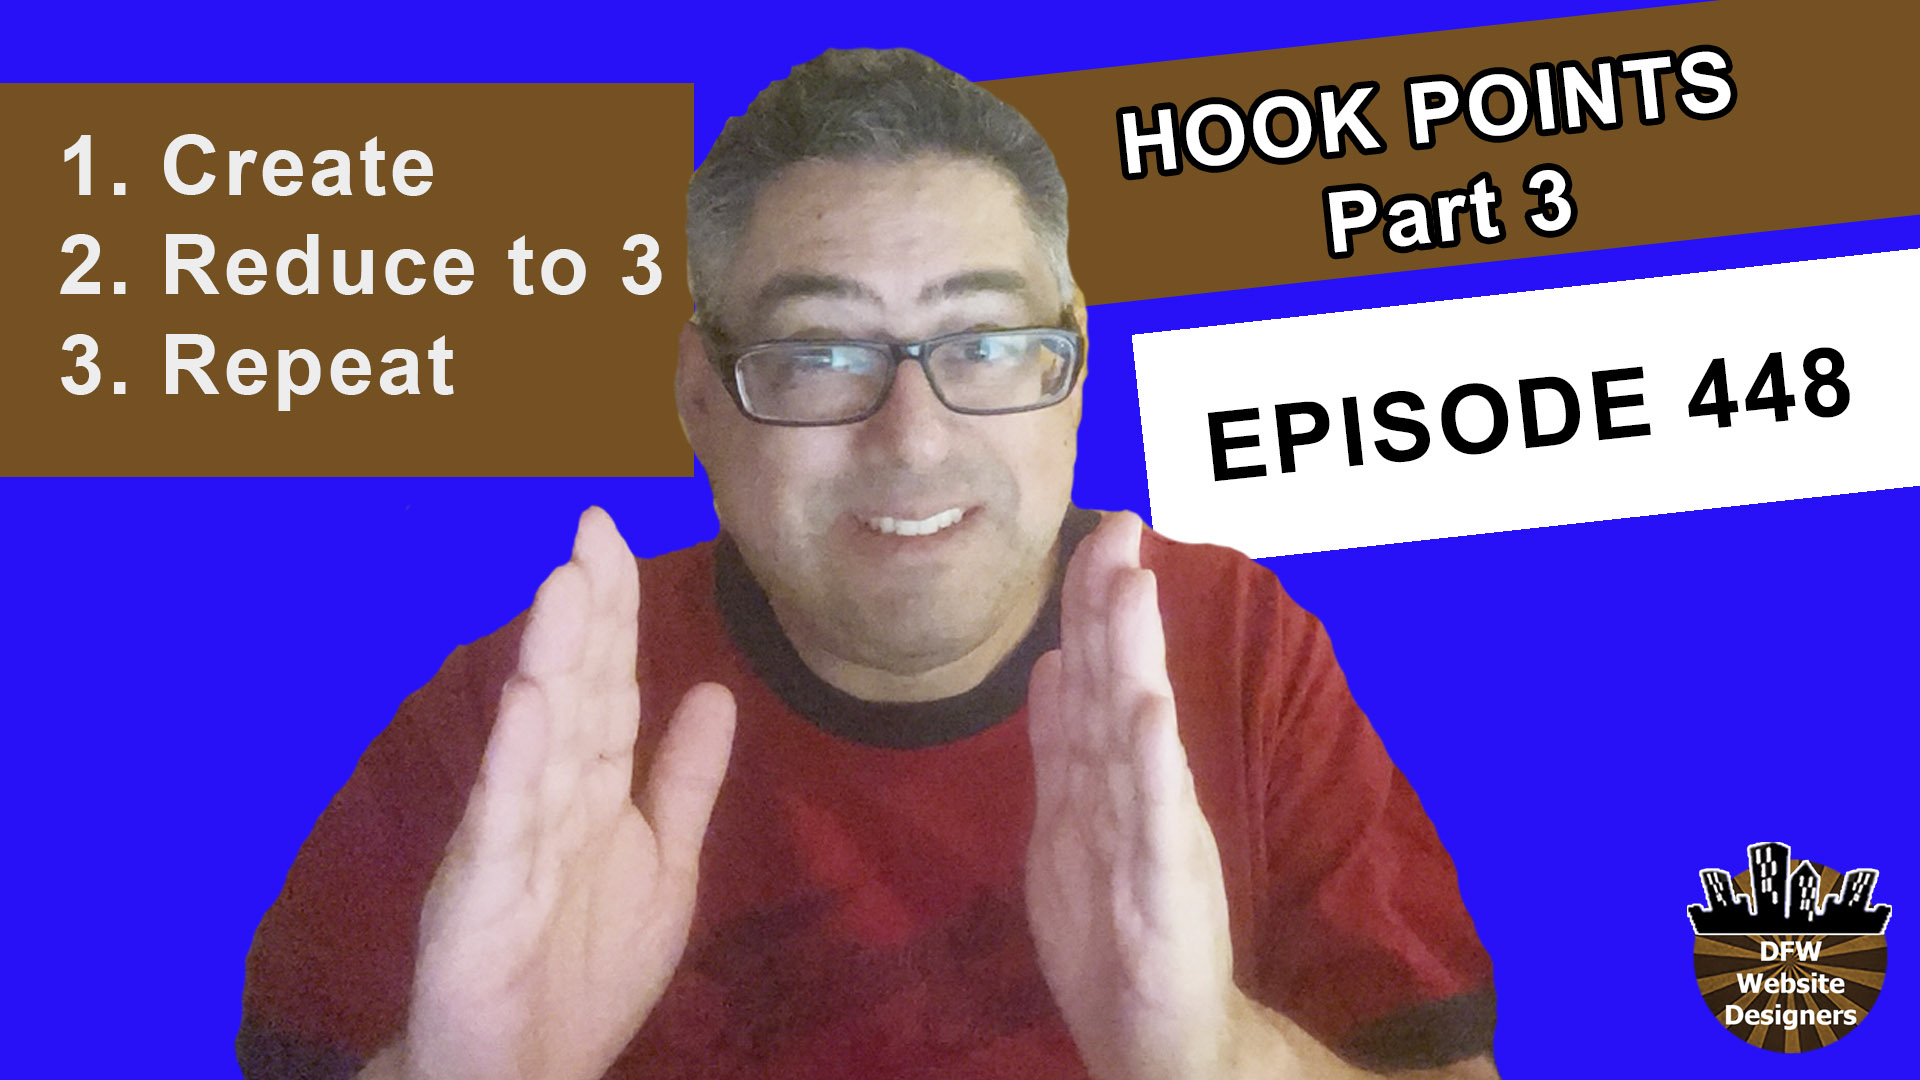 Episode 448 Hook Points Part 3: Brainstorm & Create, Reduce to 3, Repeat the Process 